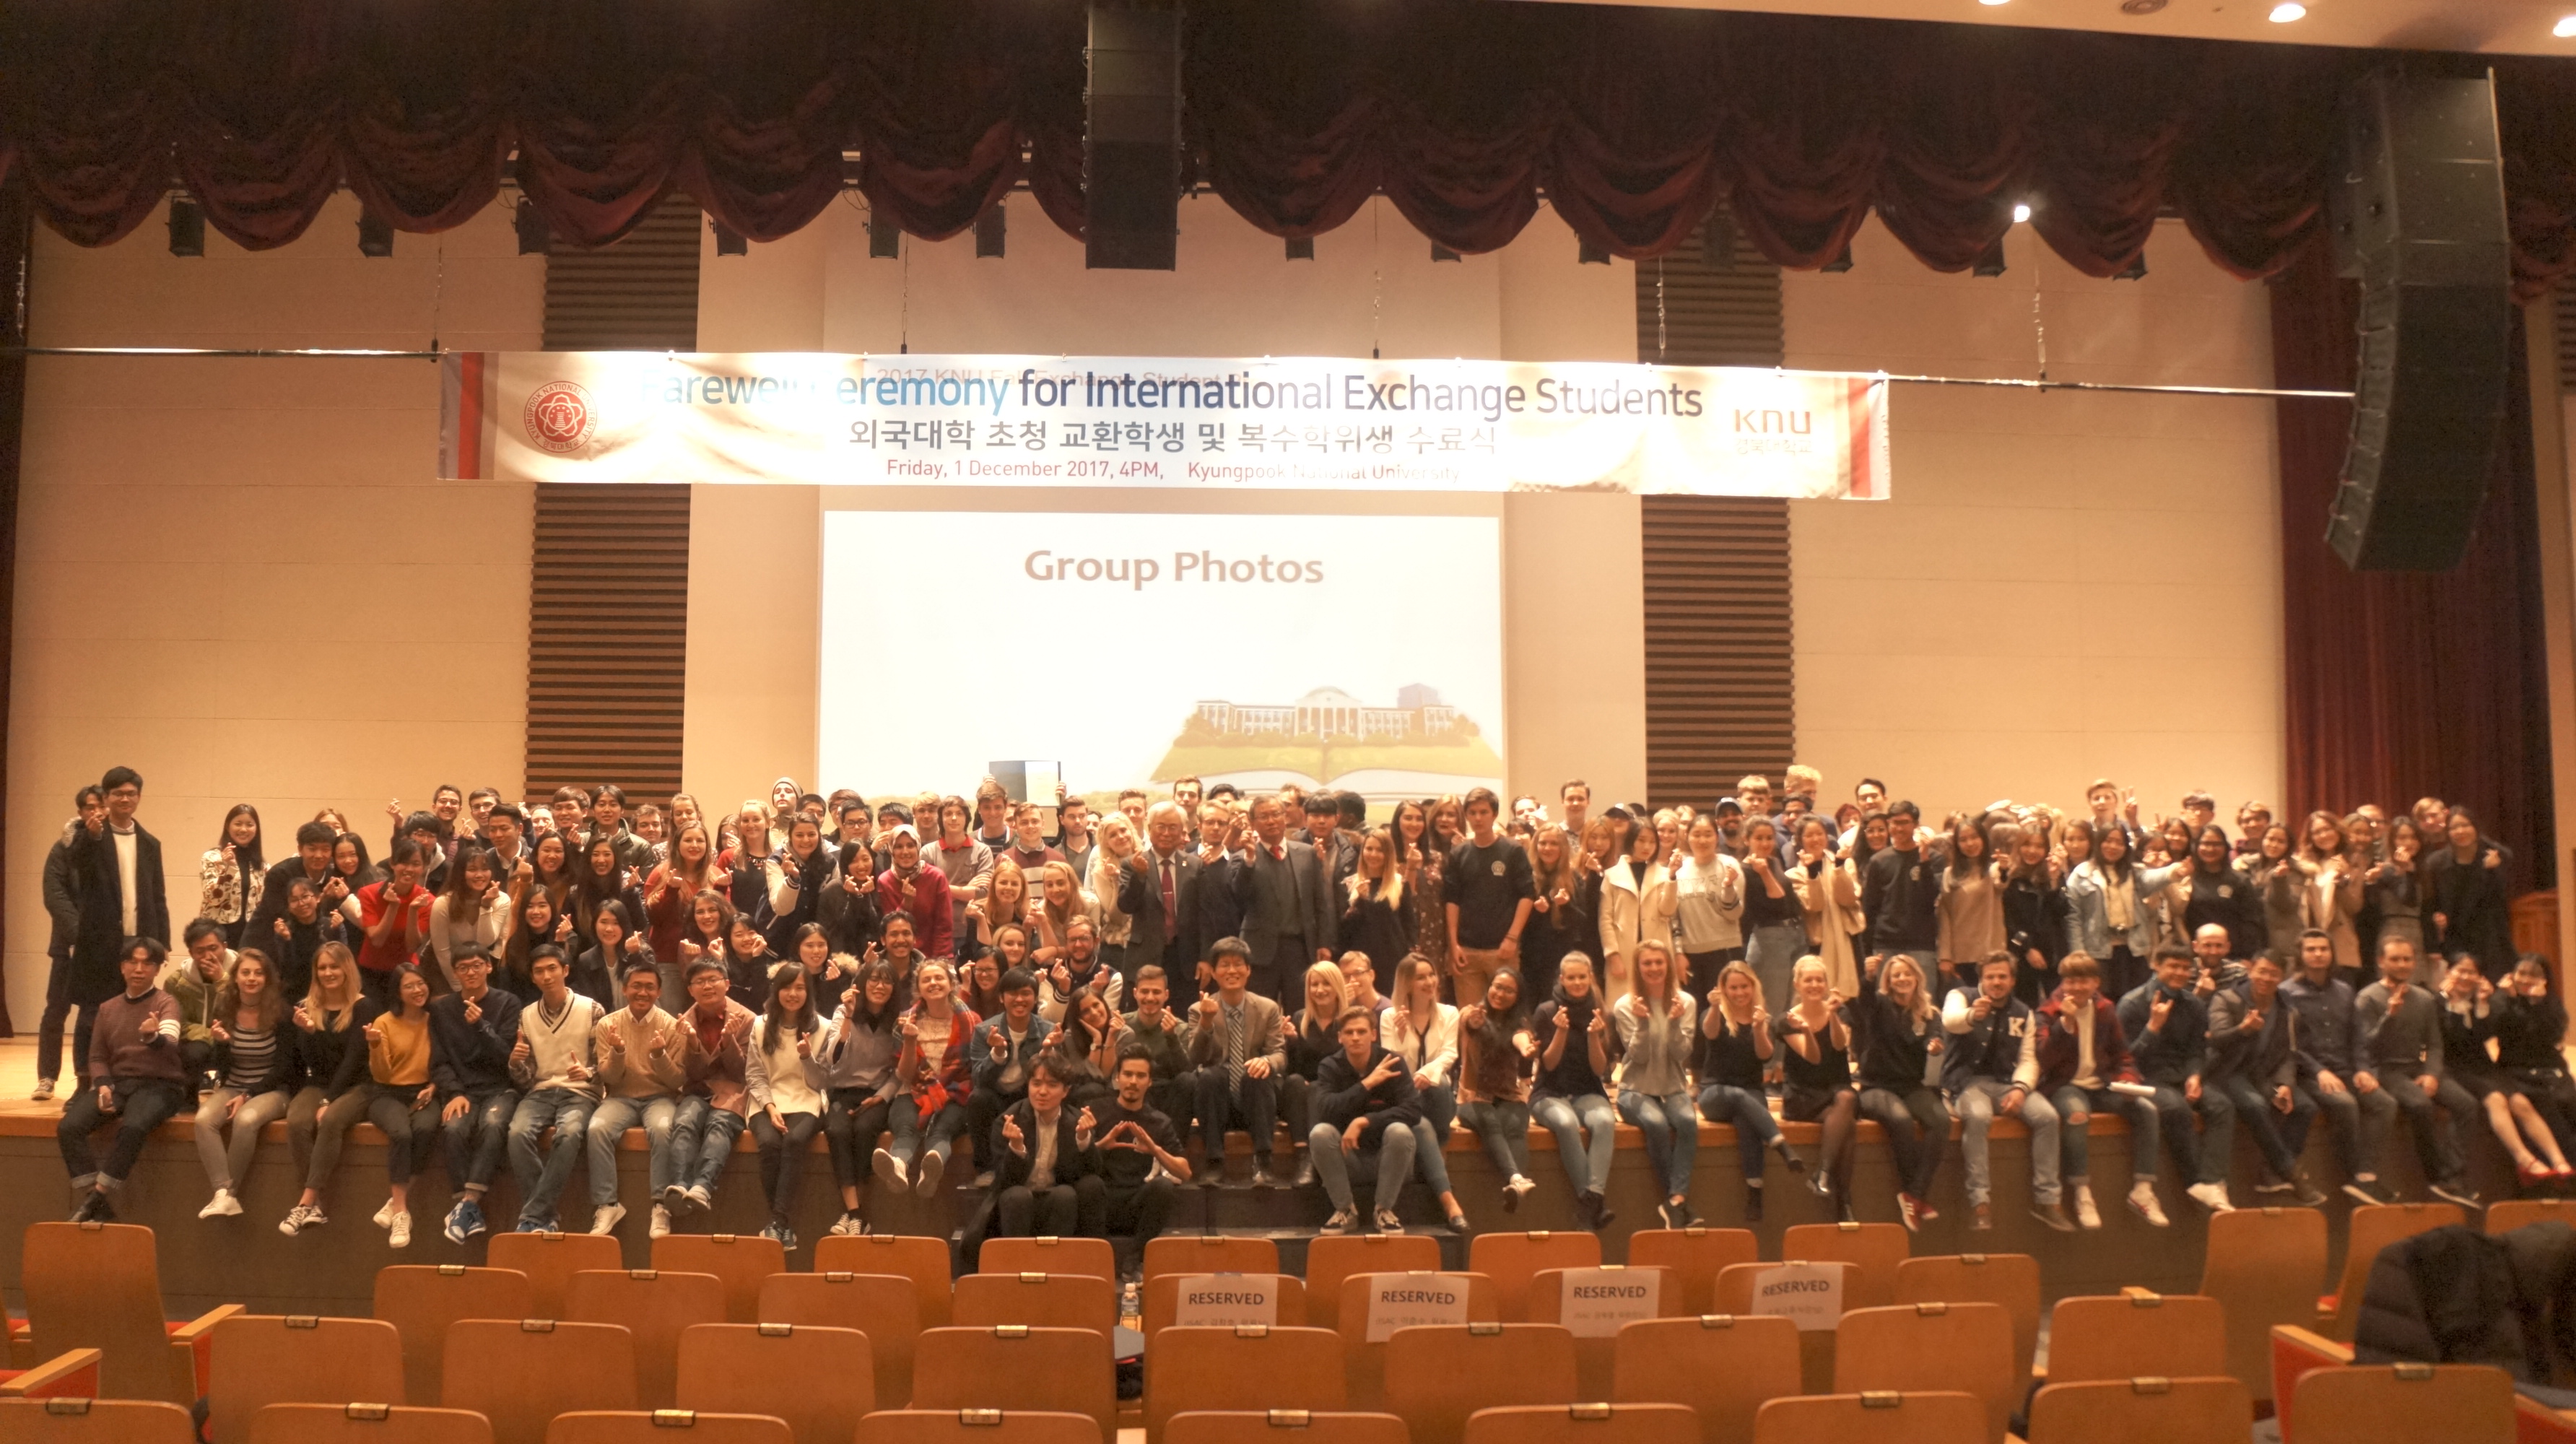 Farewell Ceremony for International Exchange Students (fall 2017) 관련 이미지입니다